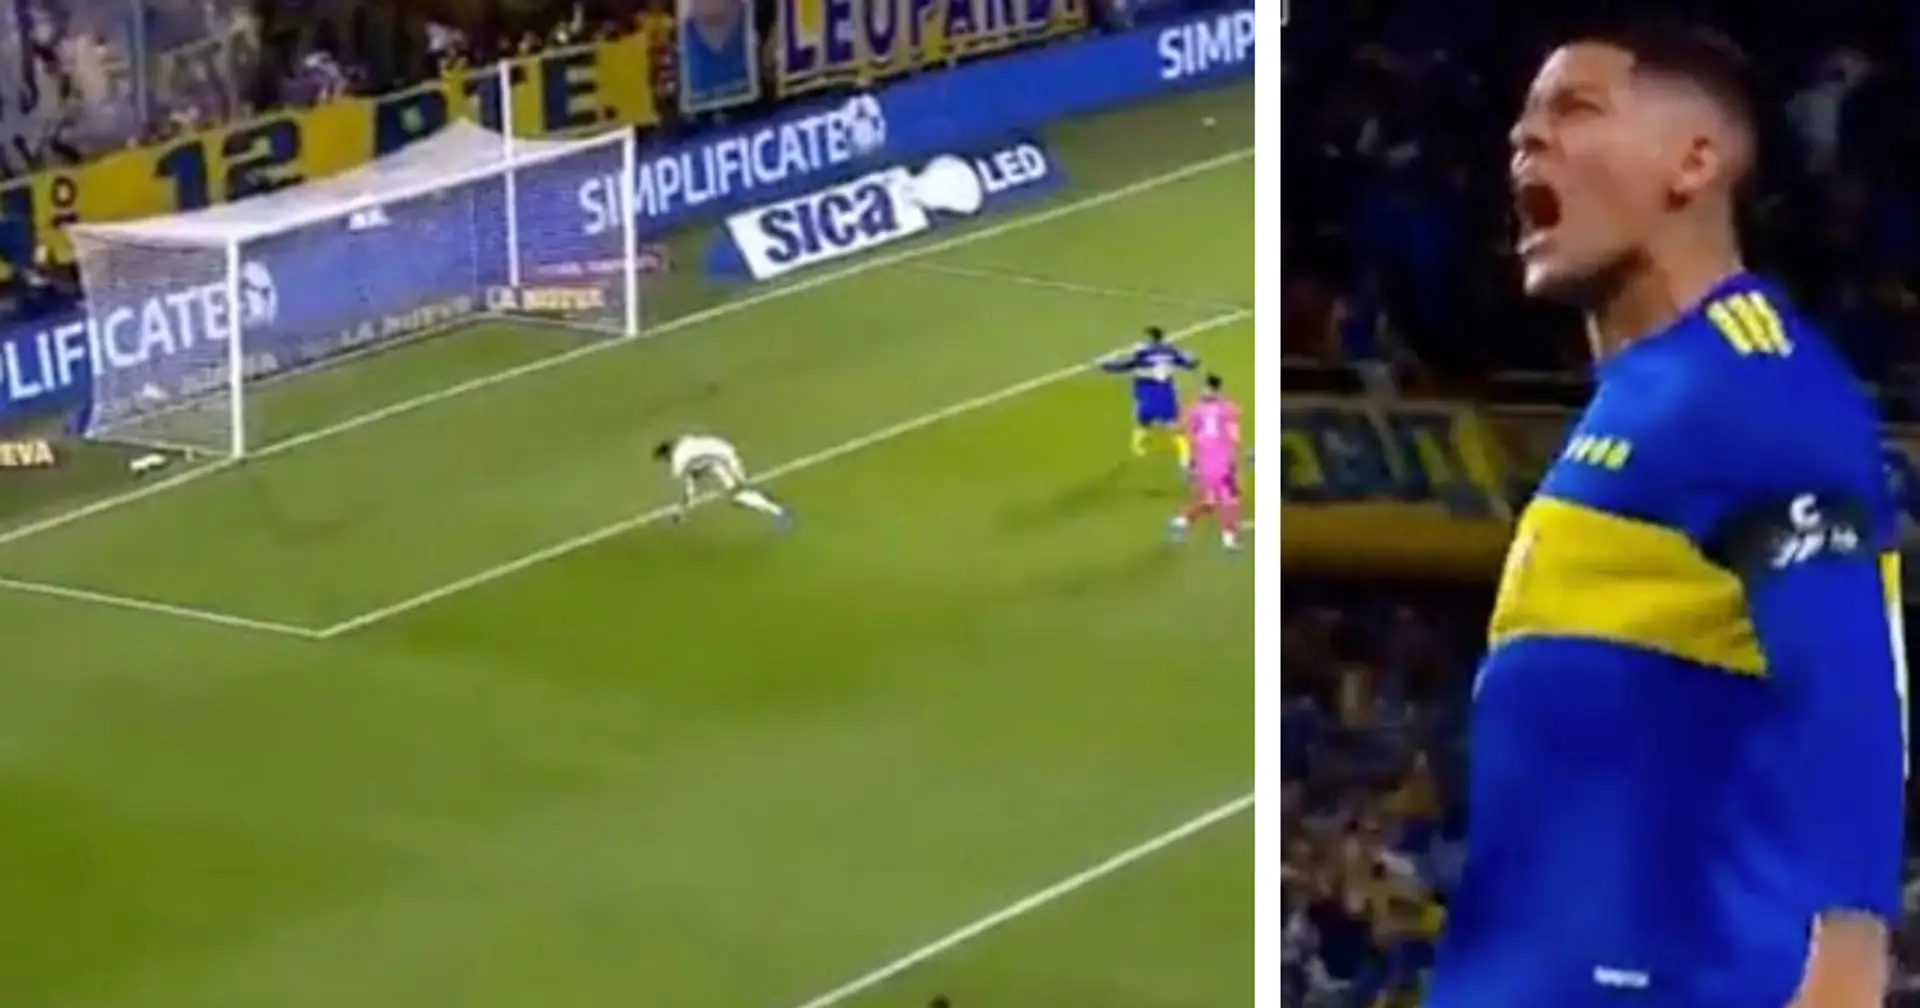 Marcos Rojo celebrates scoring goal for Boca Juniors — only to concede 10 seconds later